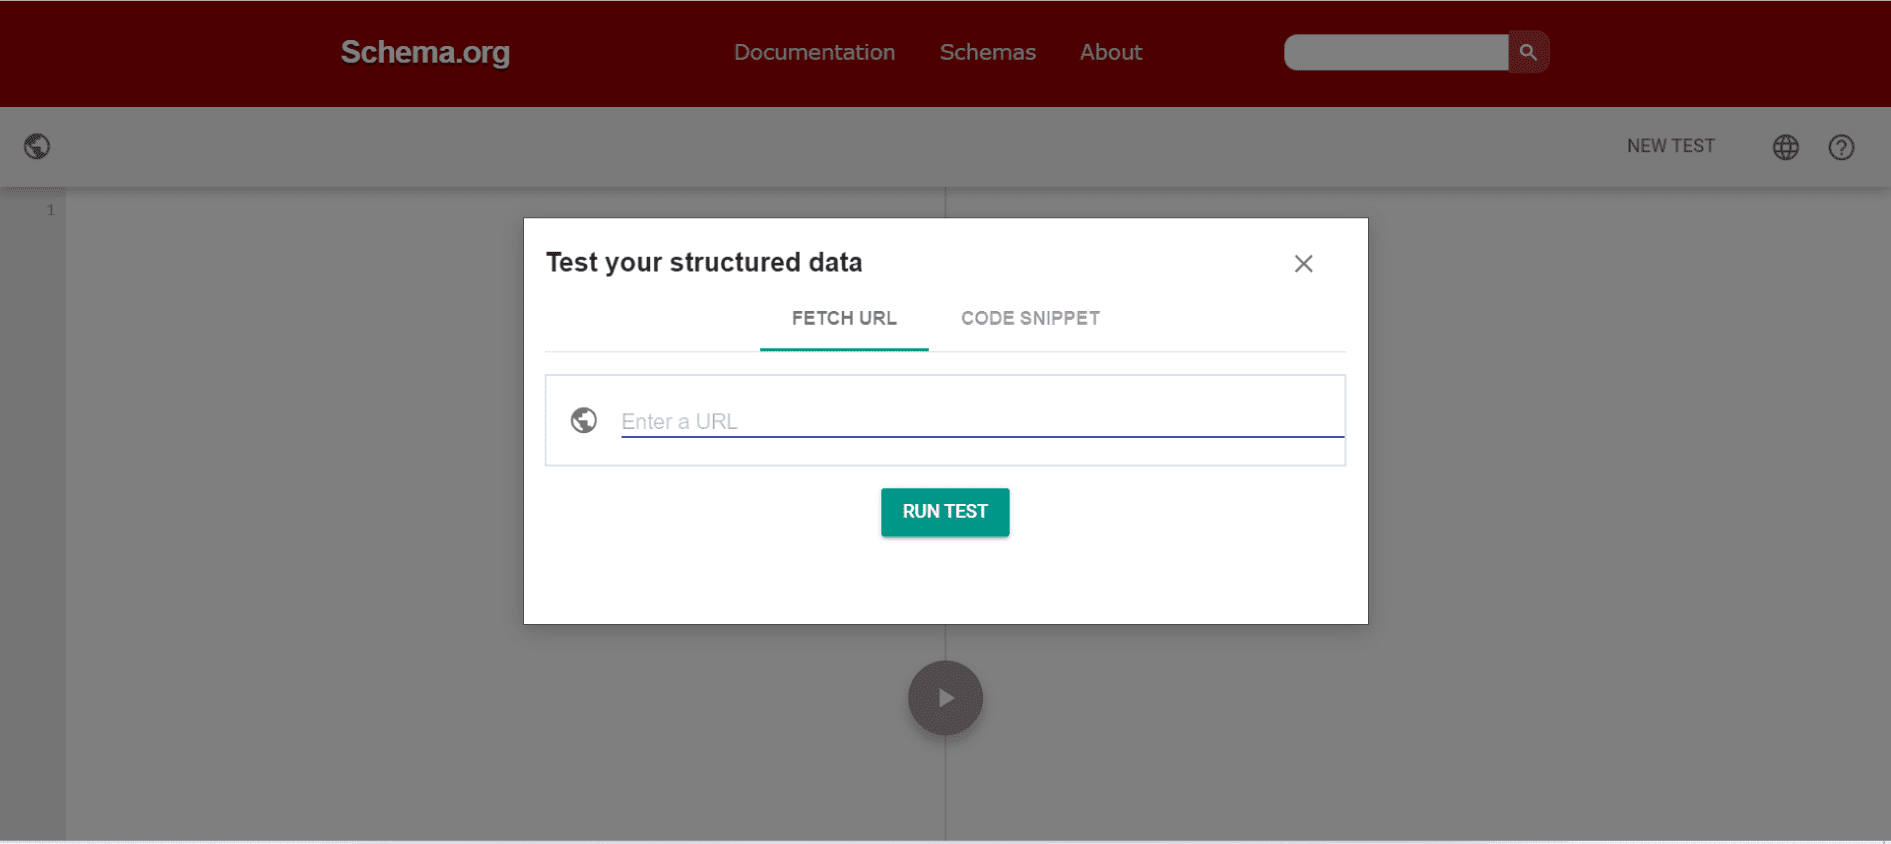 Schema.org- structured data testing tool and rich results test